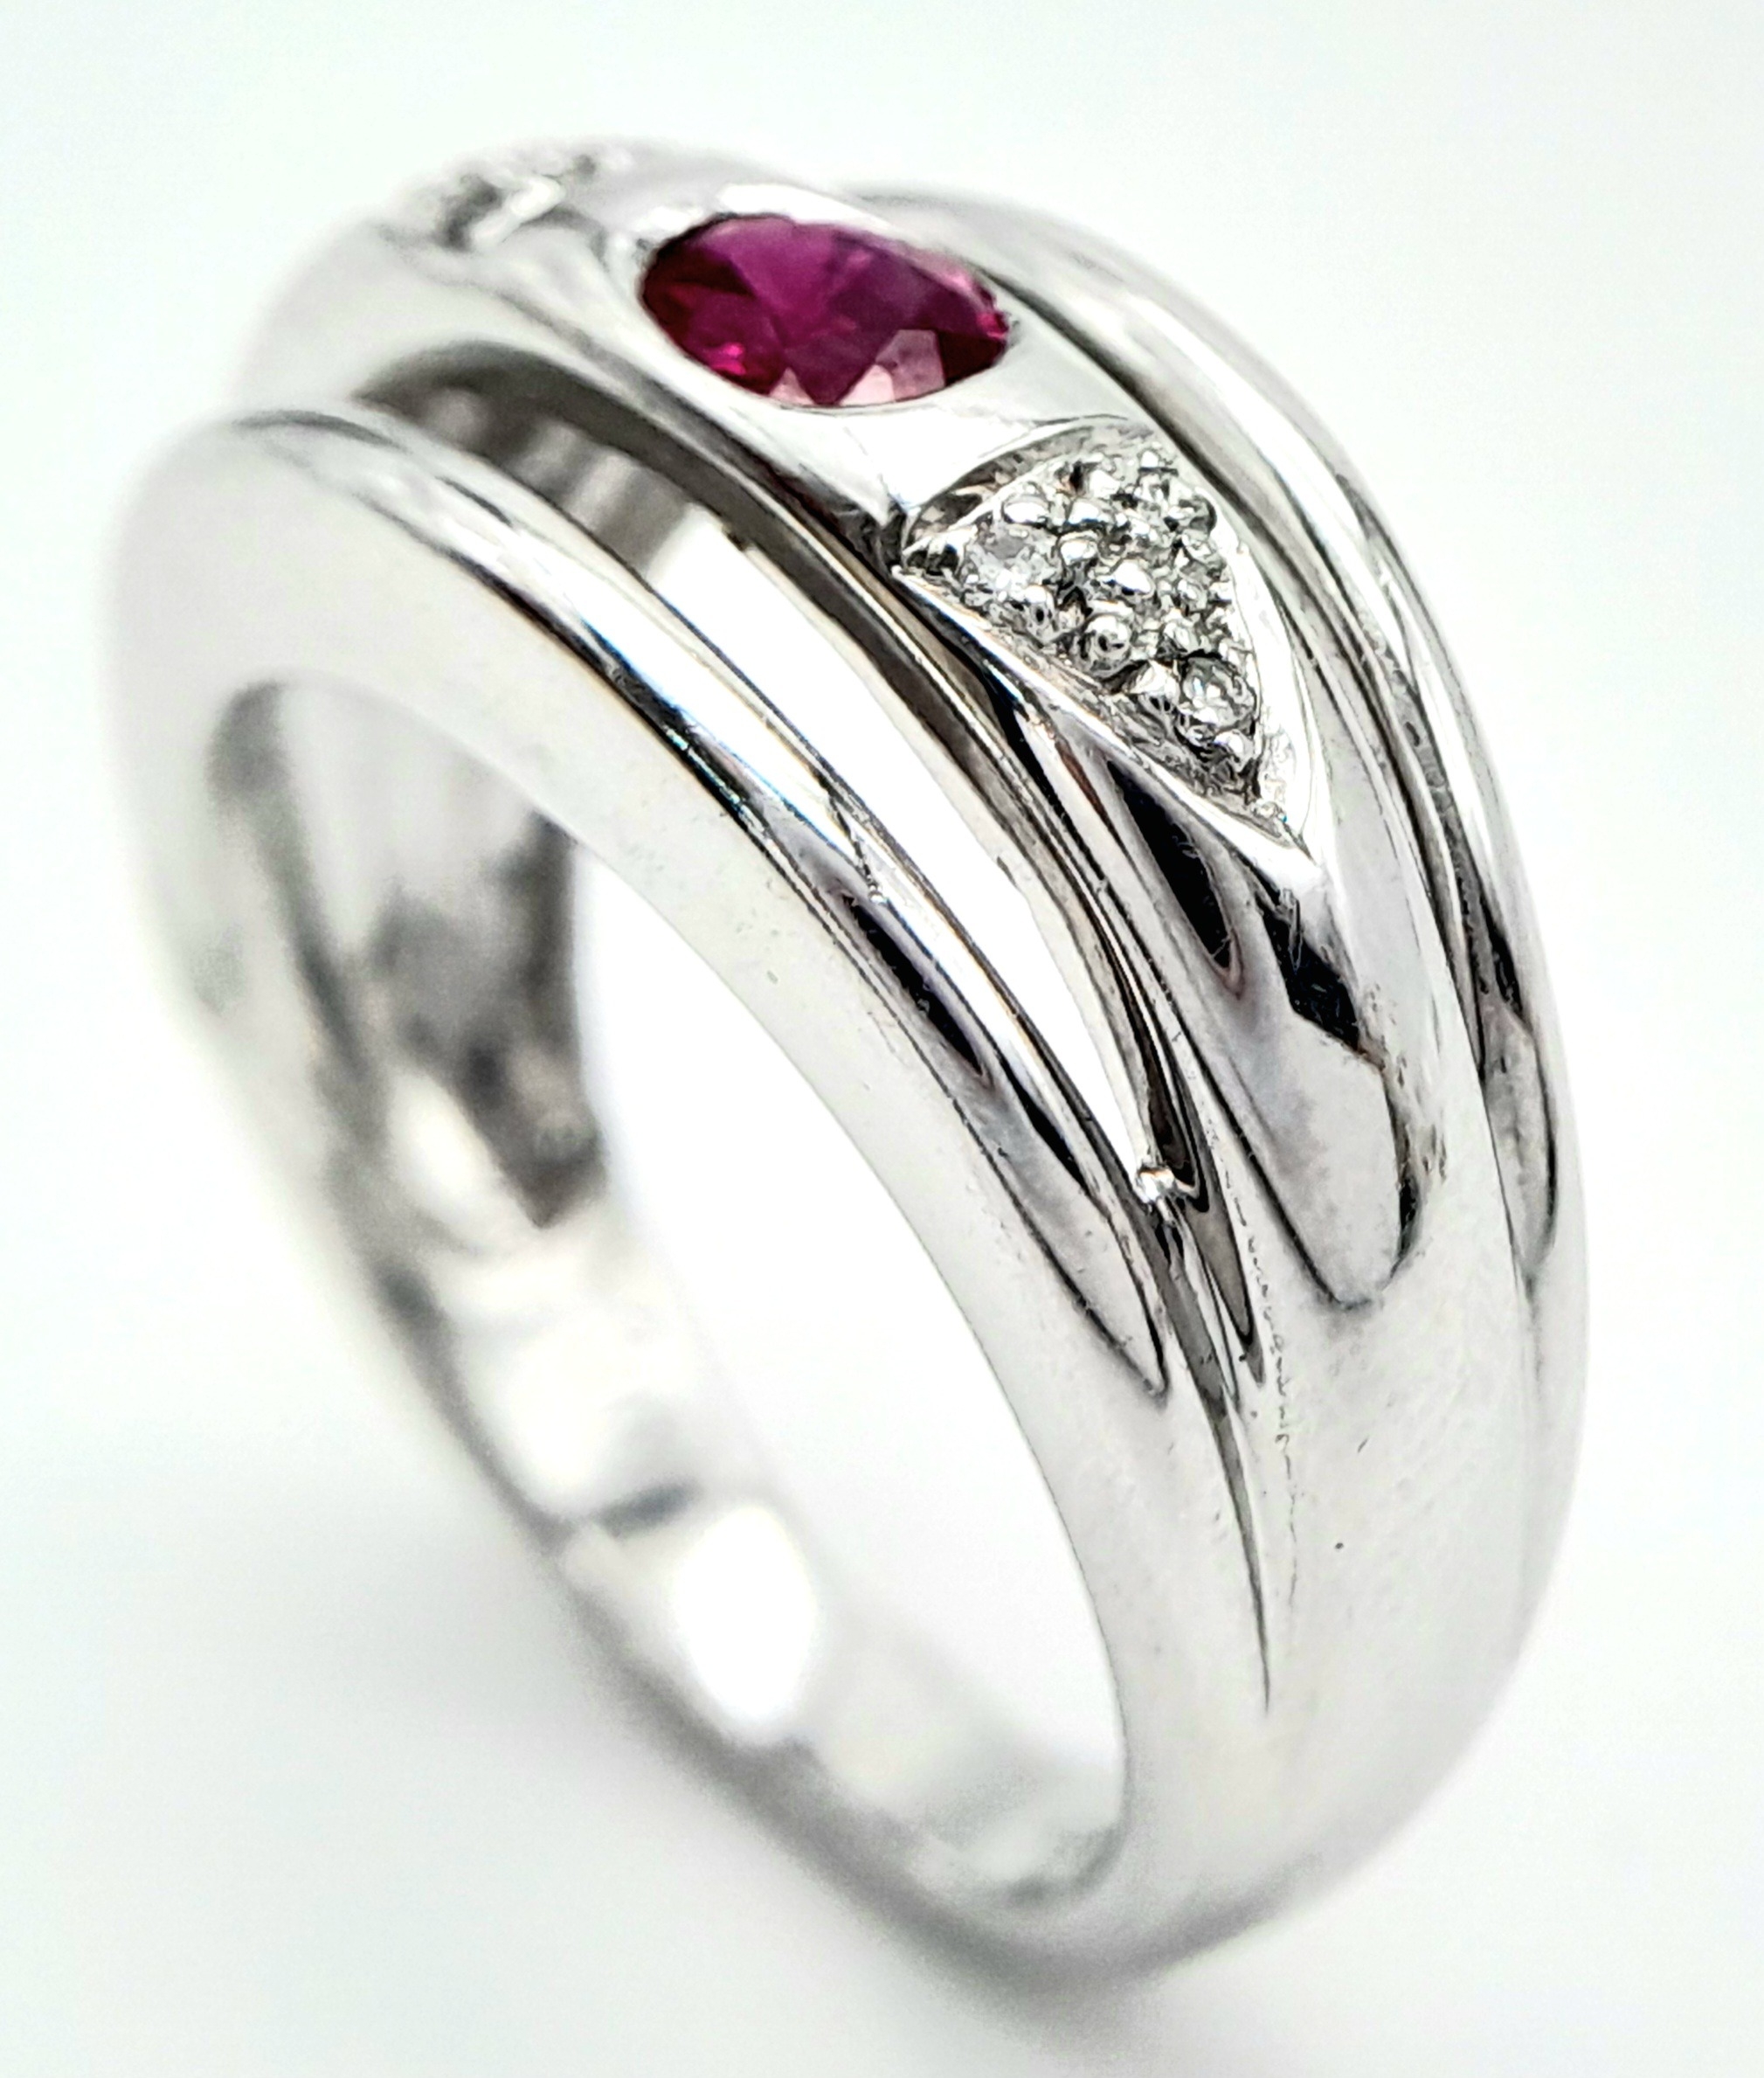 AN 18K WHITE GOLD DIAMOND & RUBY RING. Size N, 6.6g total weight. Ref: SC 8068 - Image 4 of 8